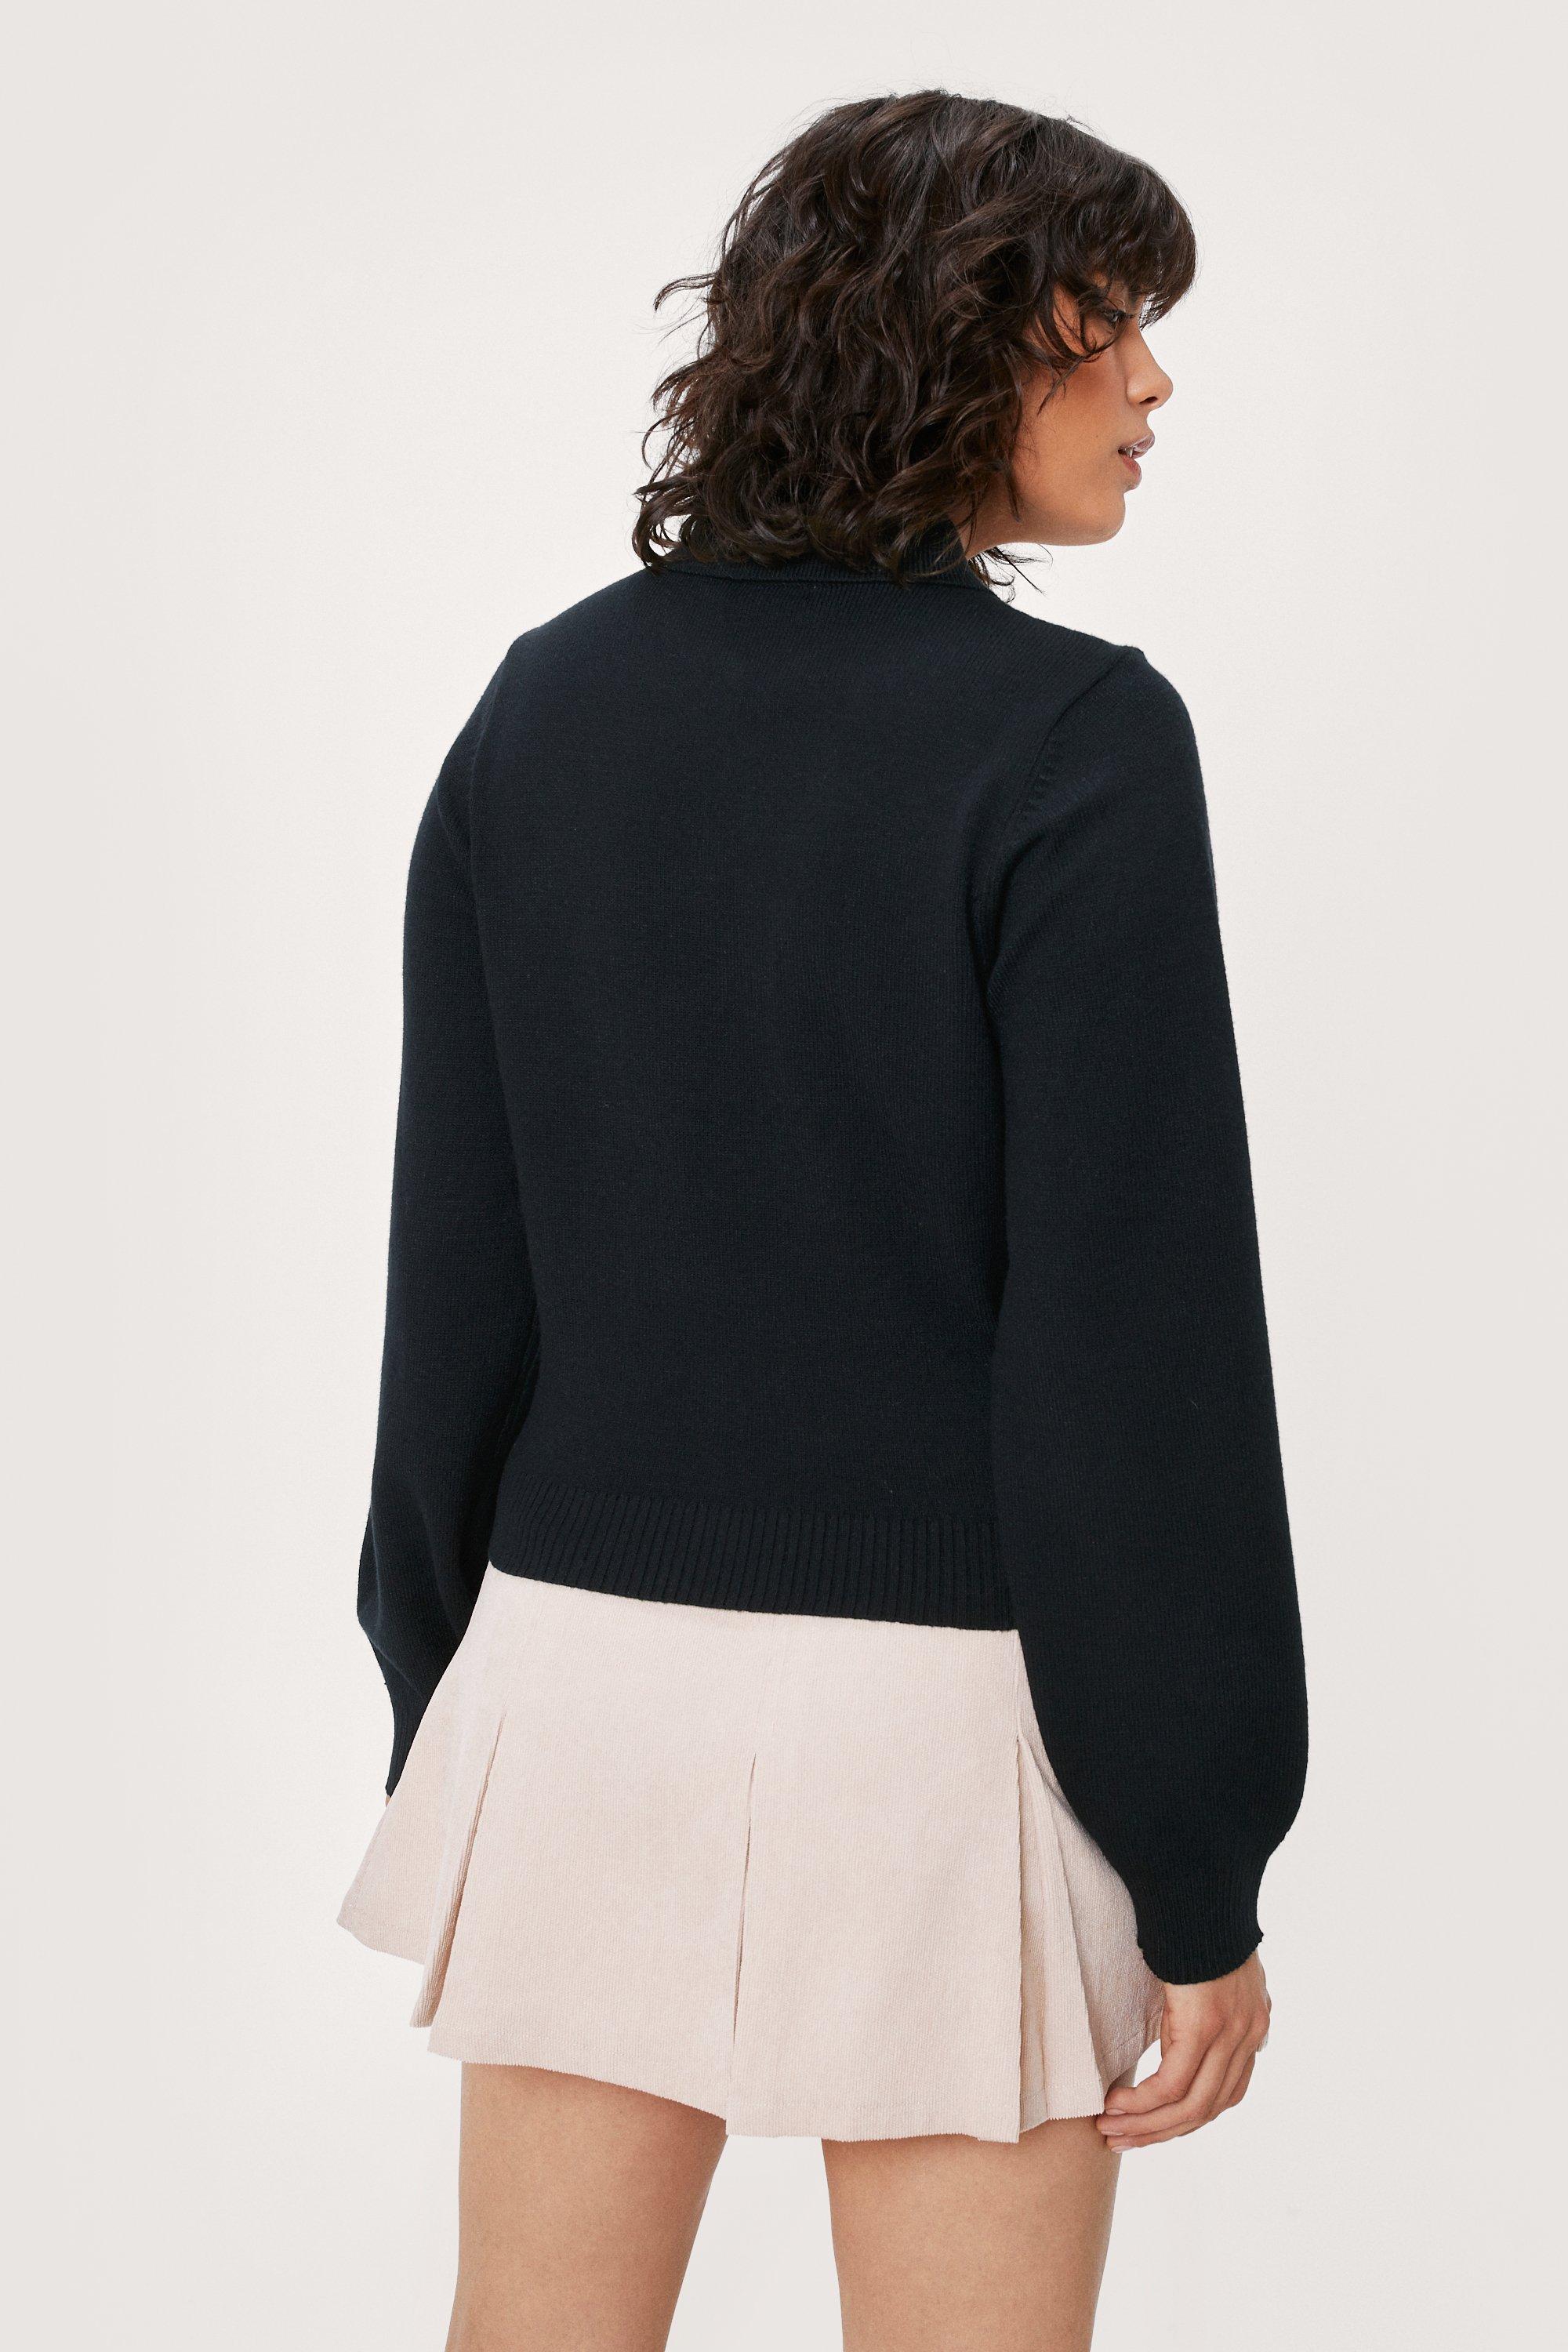 Cut Out Collar Knitted Sweater